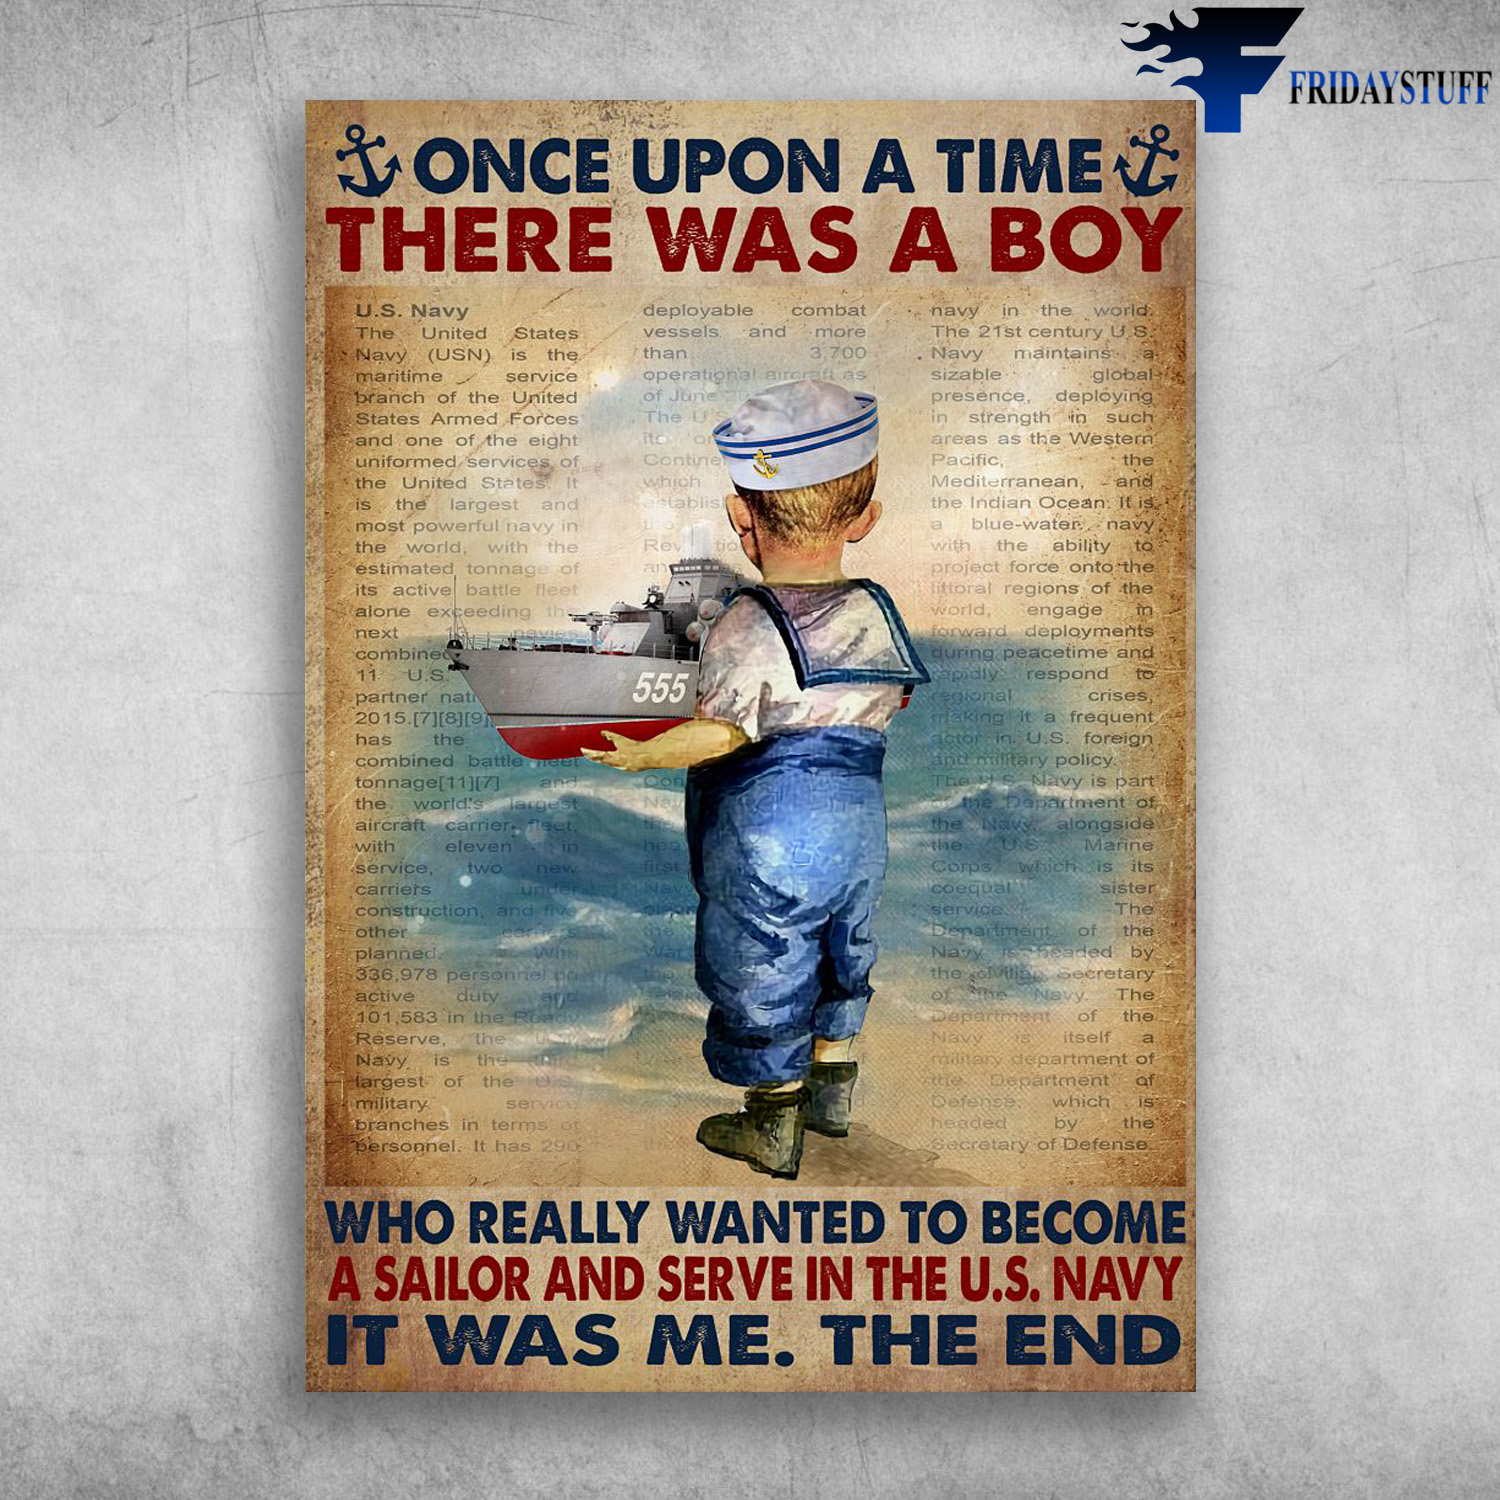 Sailor Boy - Once Upon A Time, There Was A Boy, Who Really Wanted To Become A Sailor And Serve In The U.S. Navy, It Was Me, The End